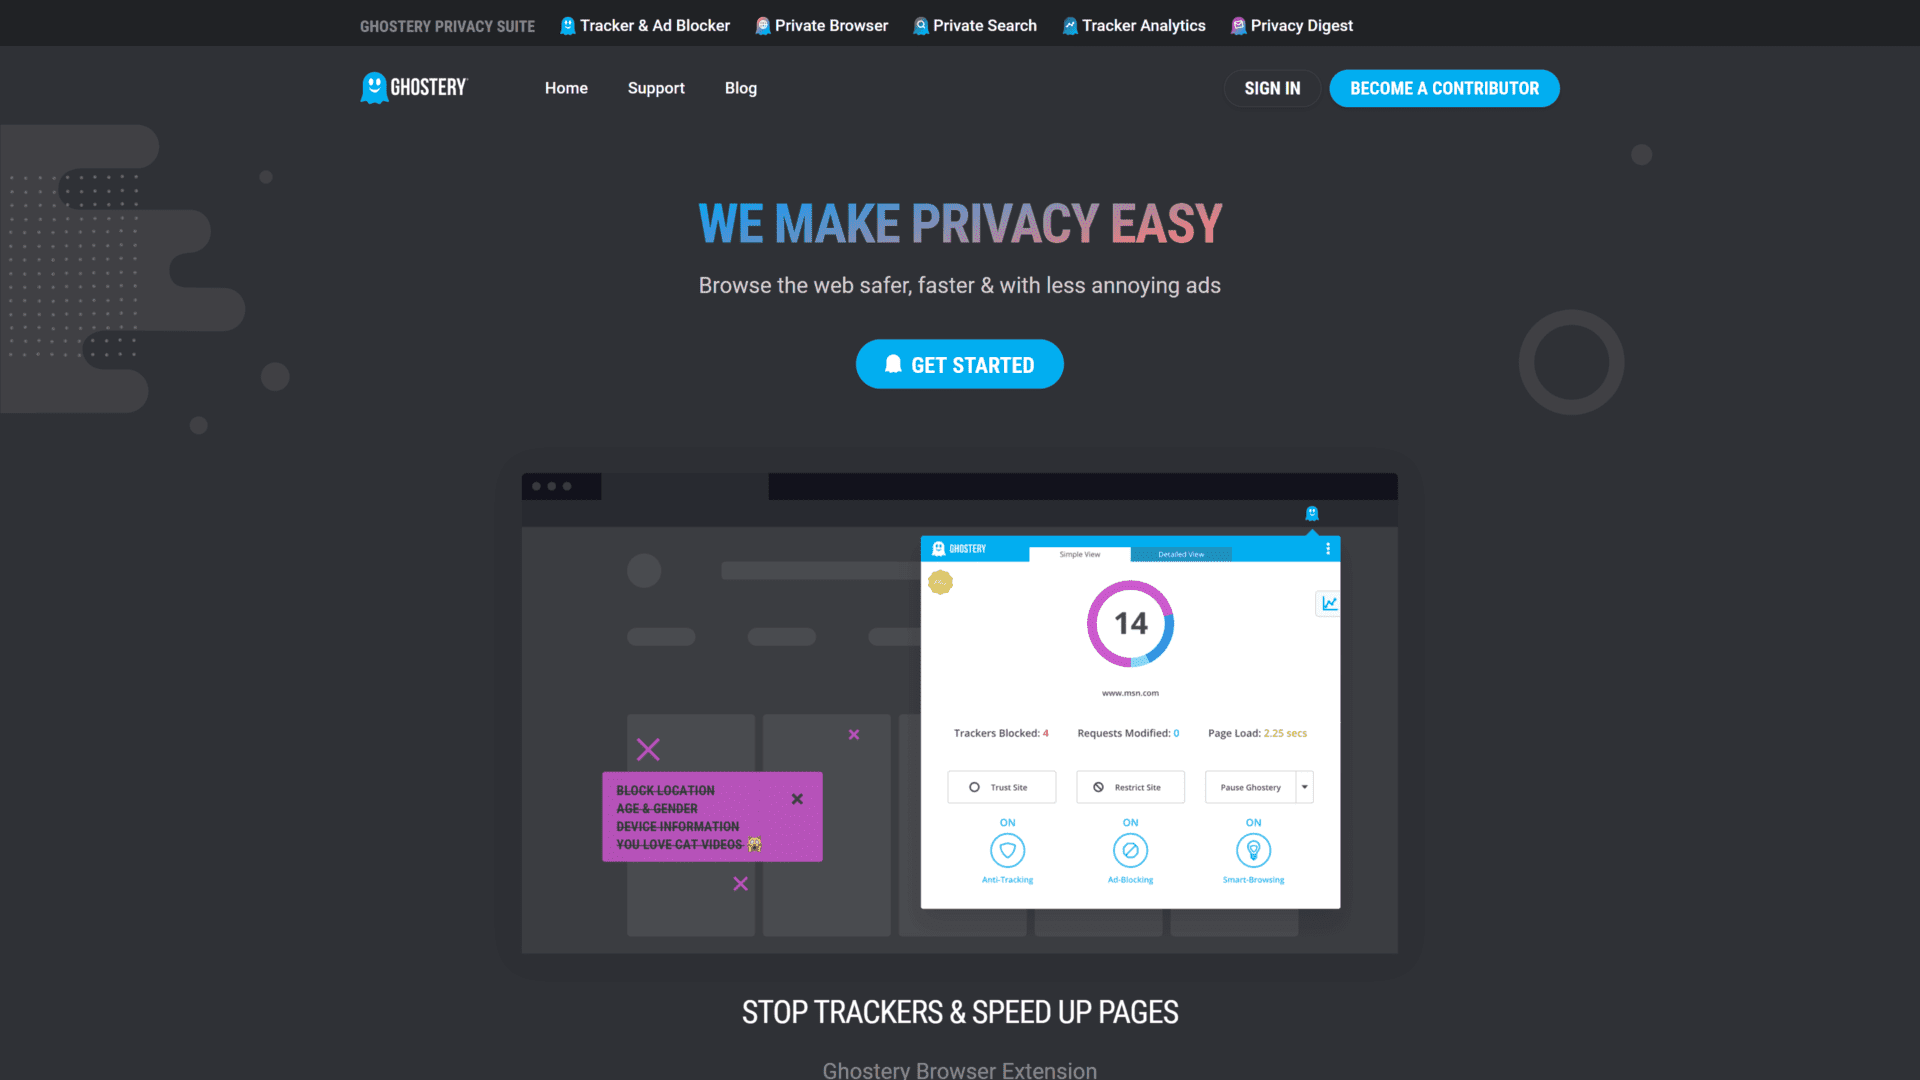 A screenshot of the ghostery homepage